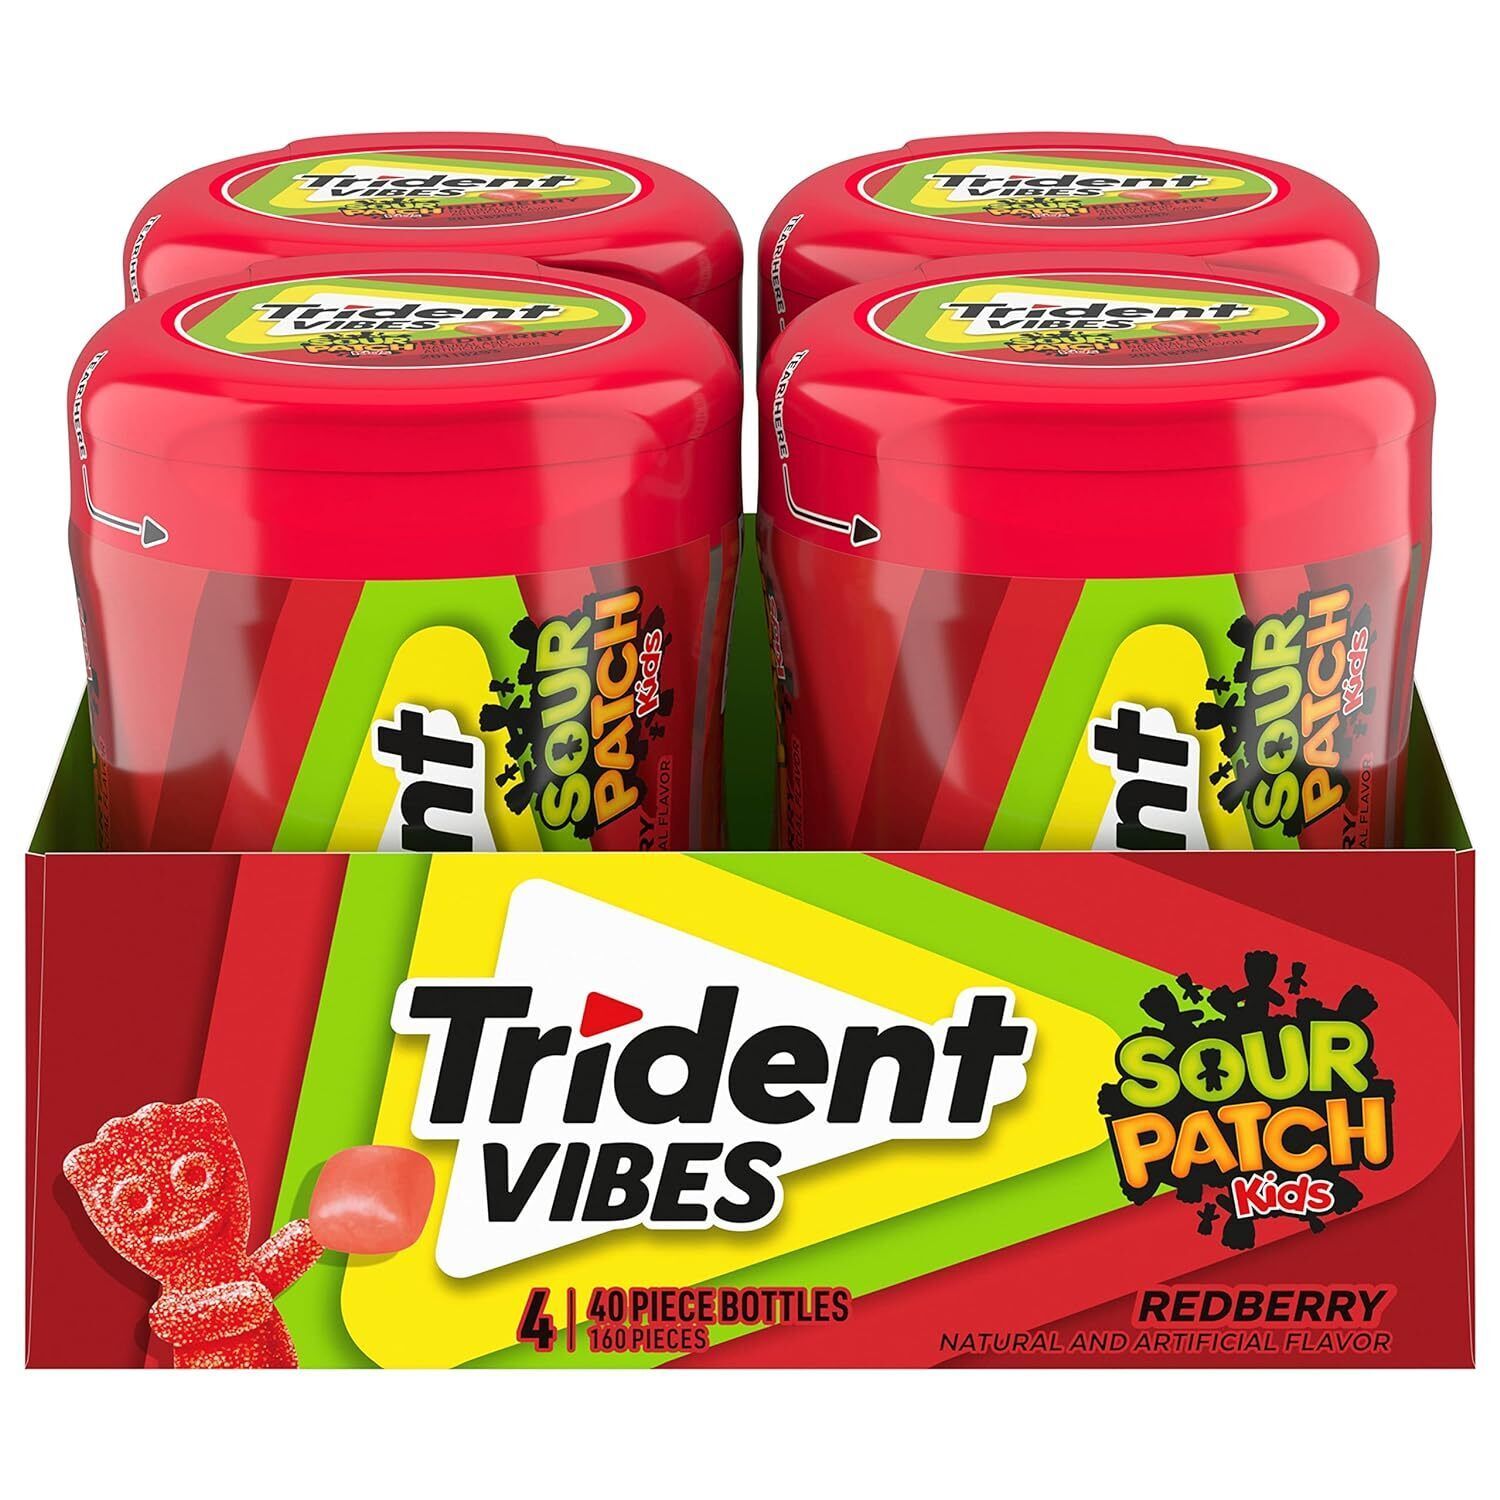 Primary image for Trident Vibes SOUR PATCH KIDS Redberry Sugar Free Gum, 4-40 Piece Bottles (160